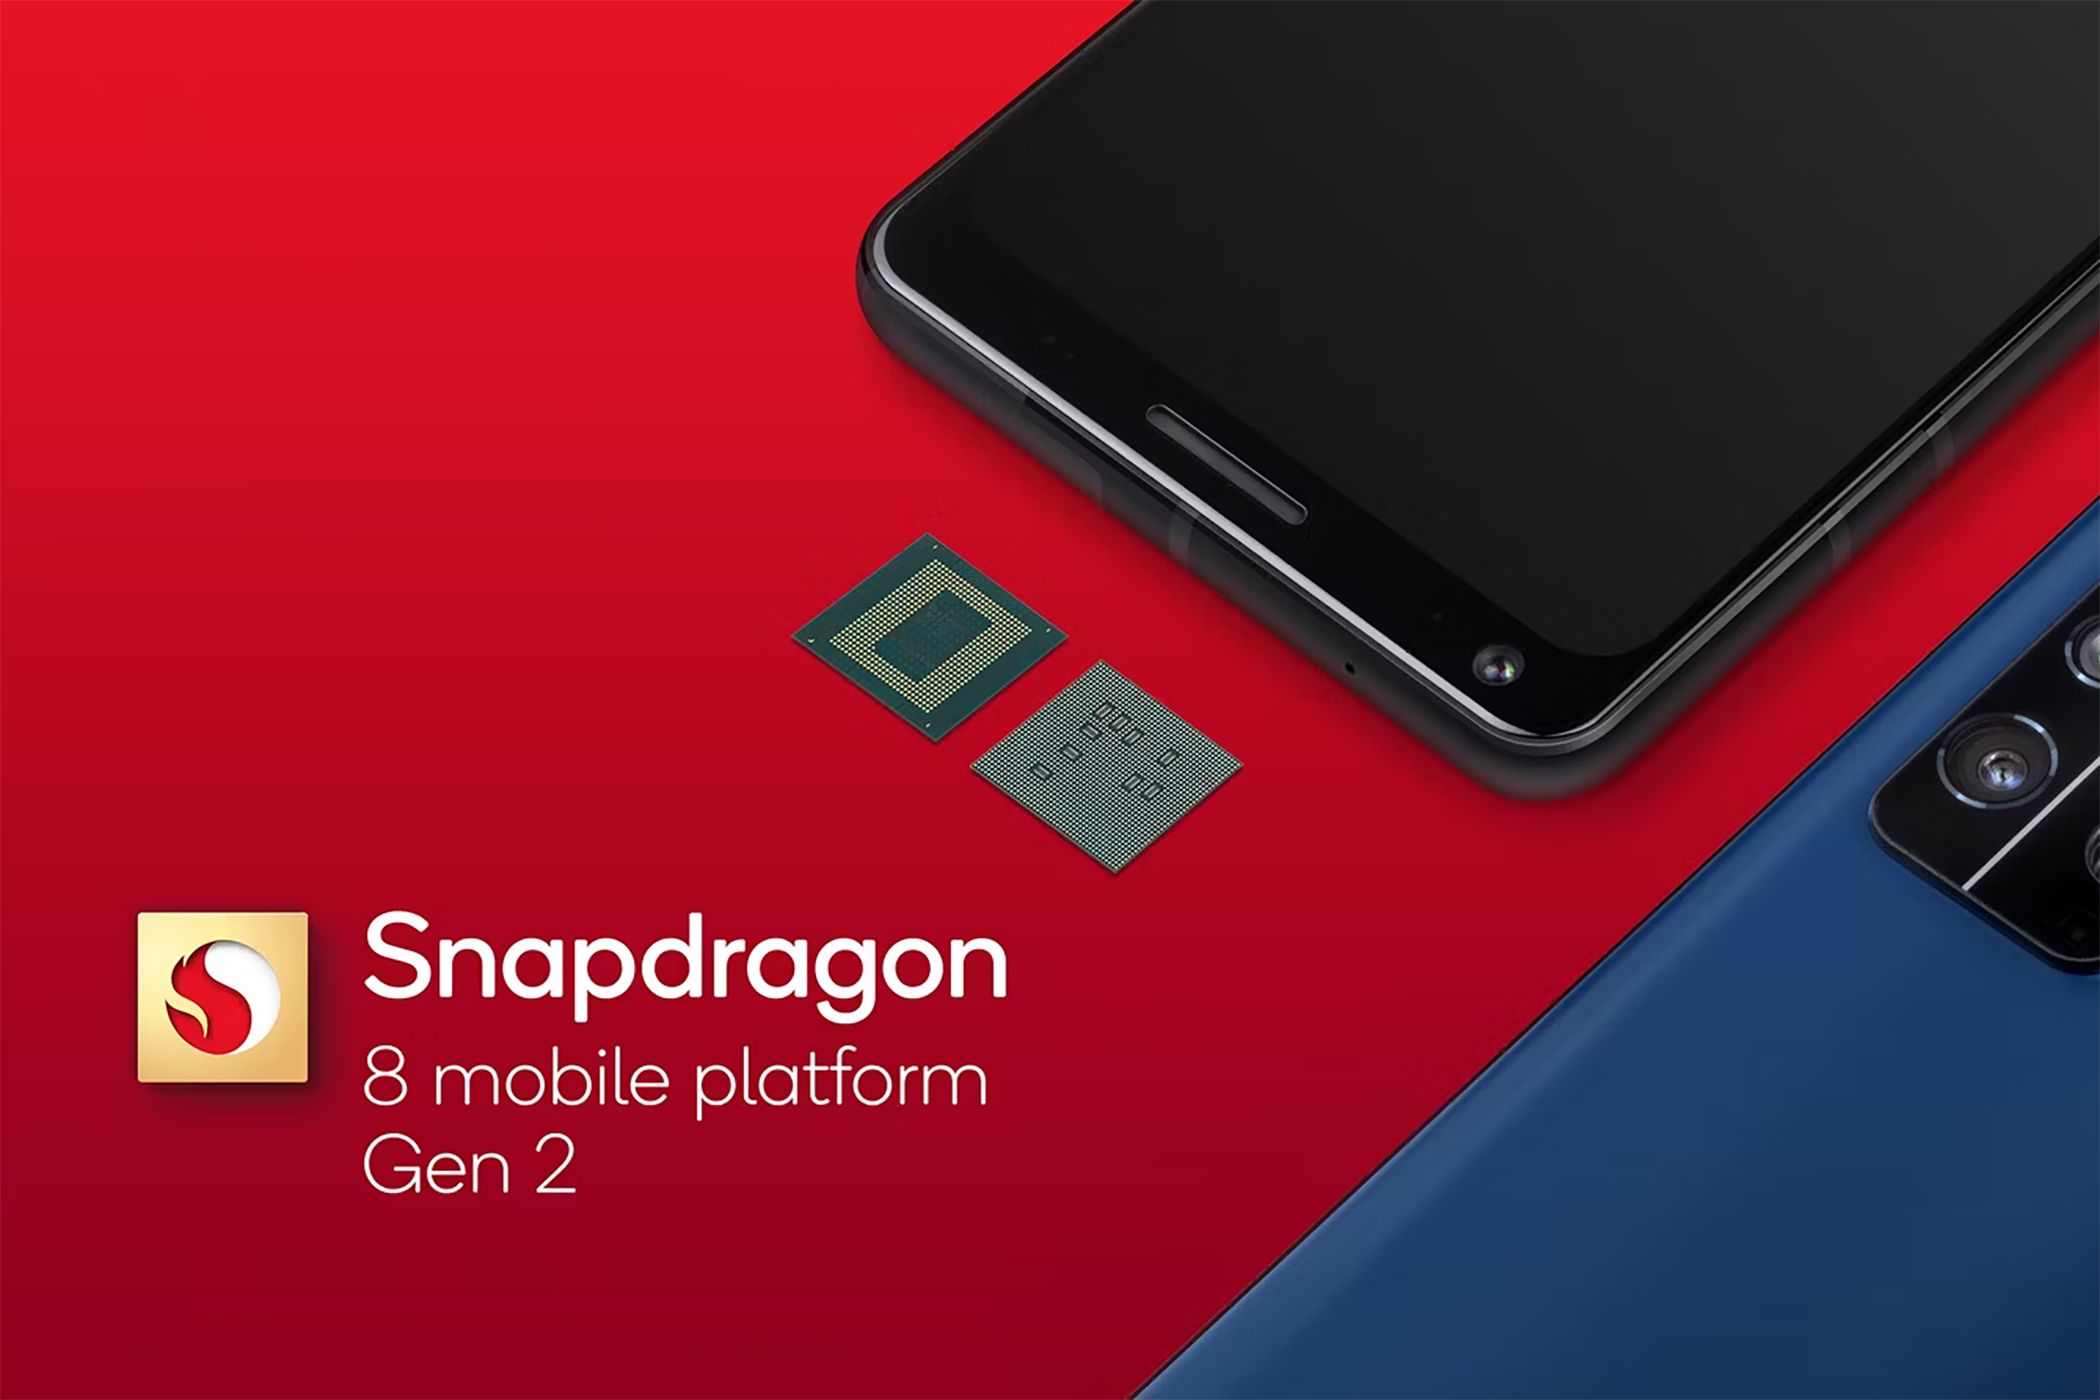 Qualcomm Snapdragon 8 Gen 2 logo next to chip and reference devices on red background.